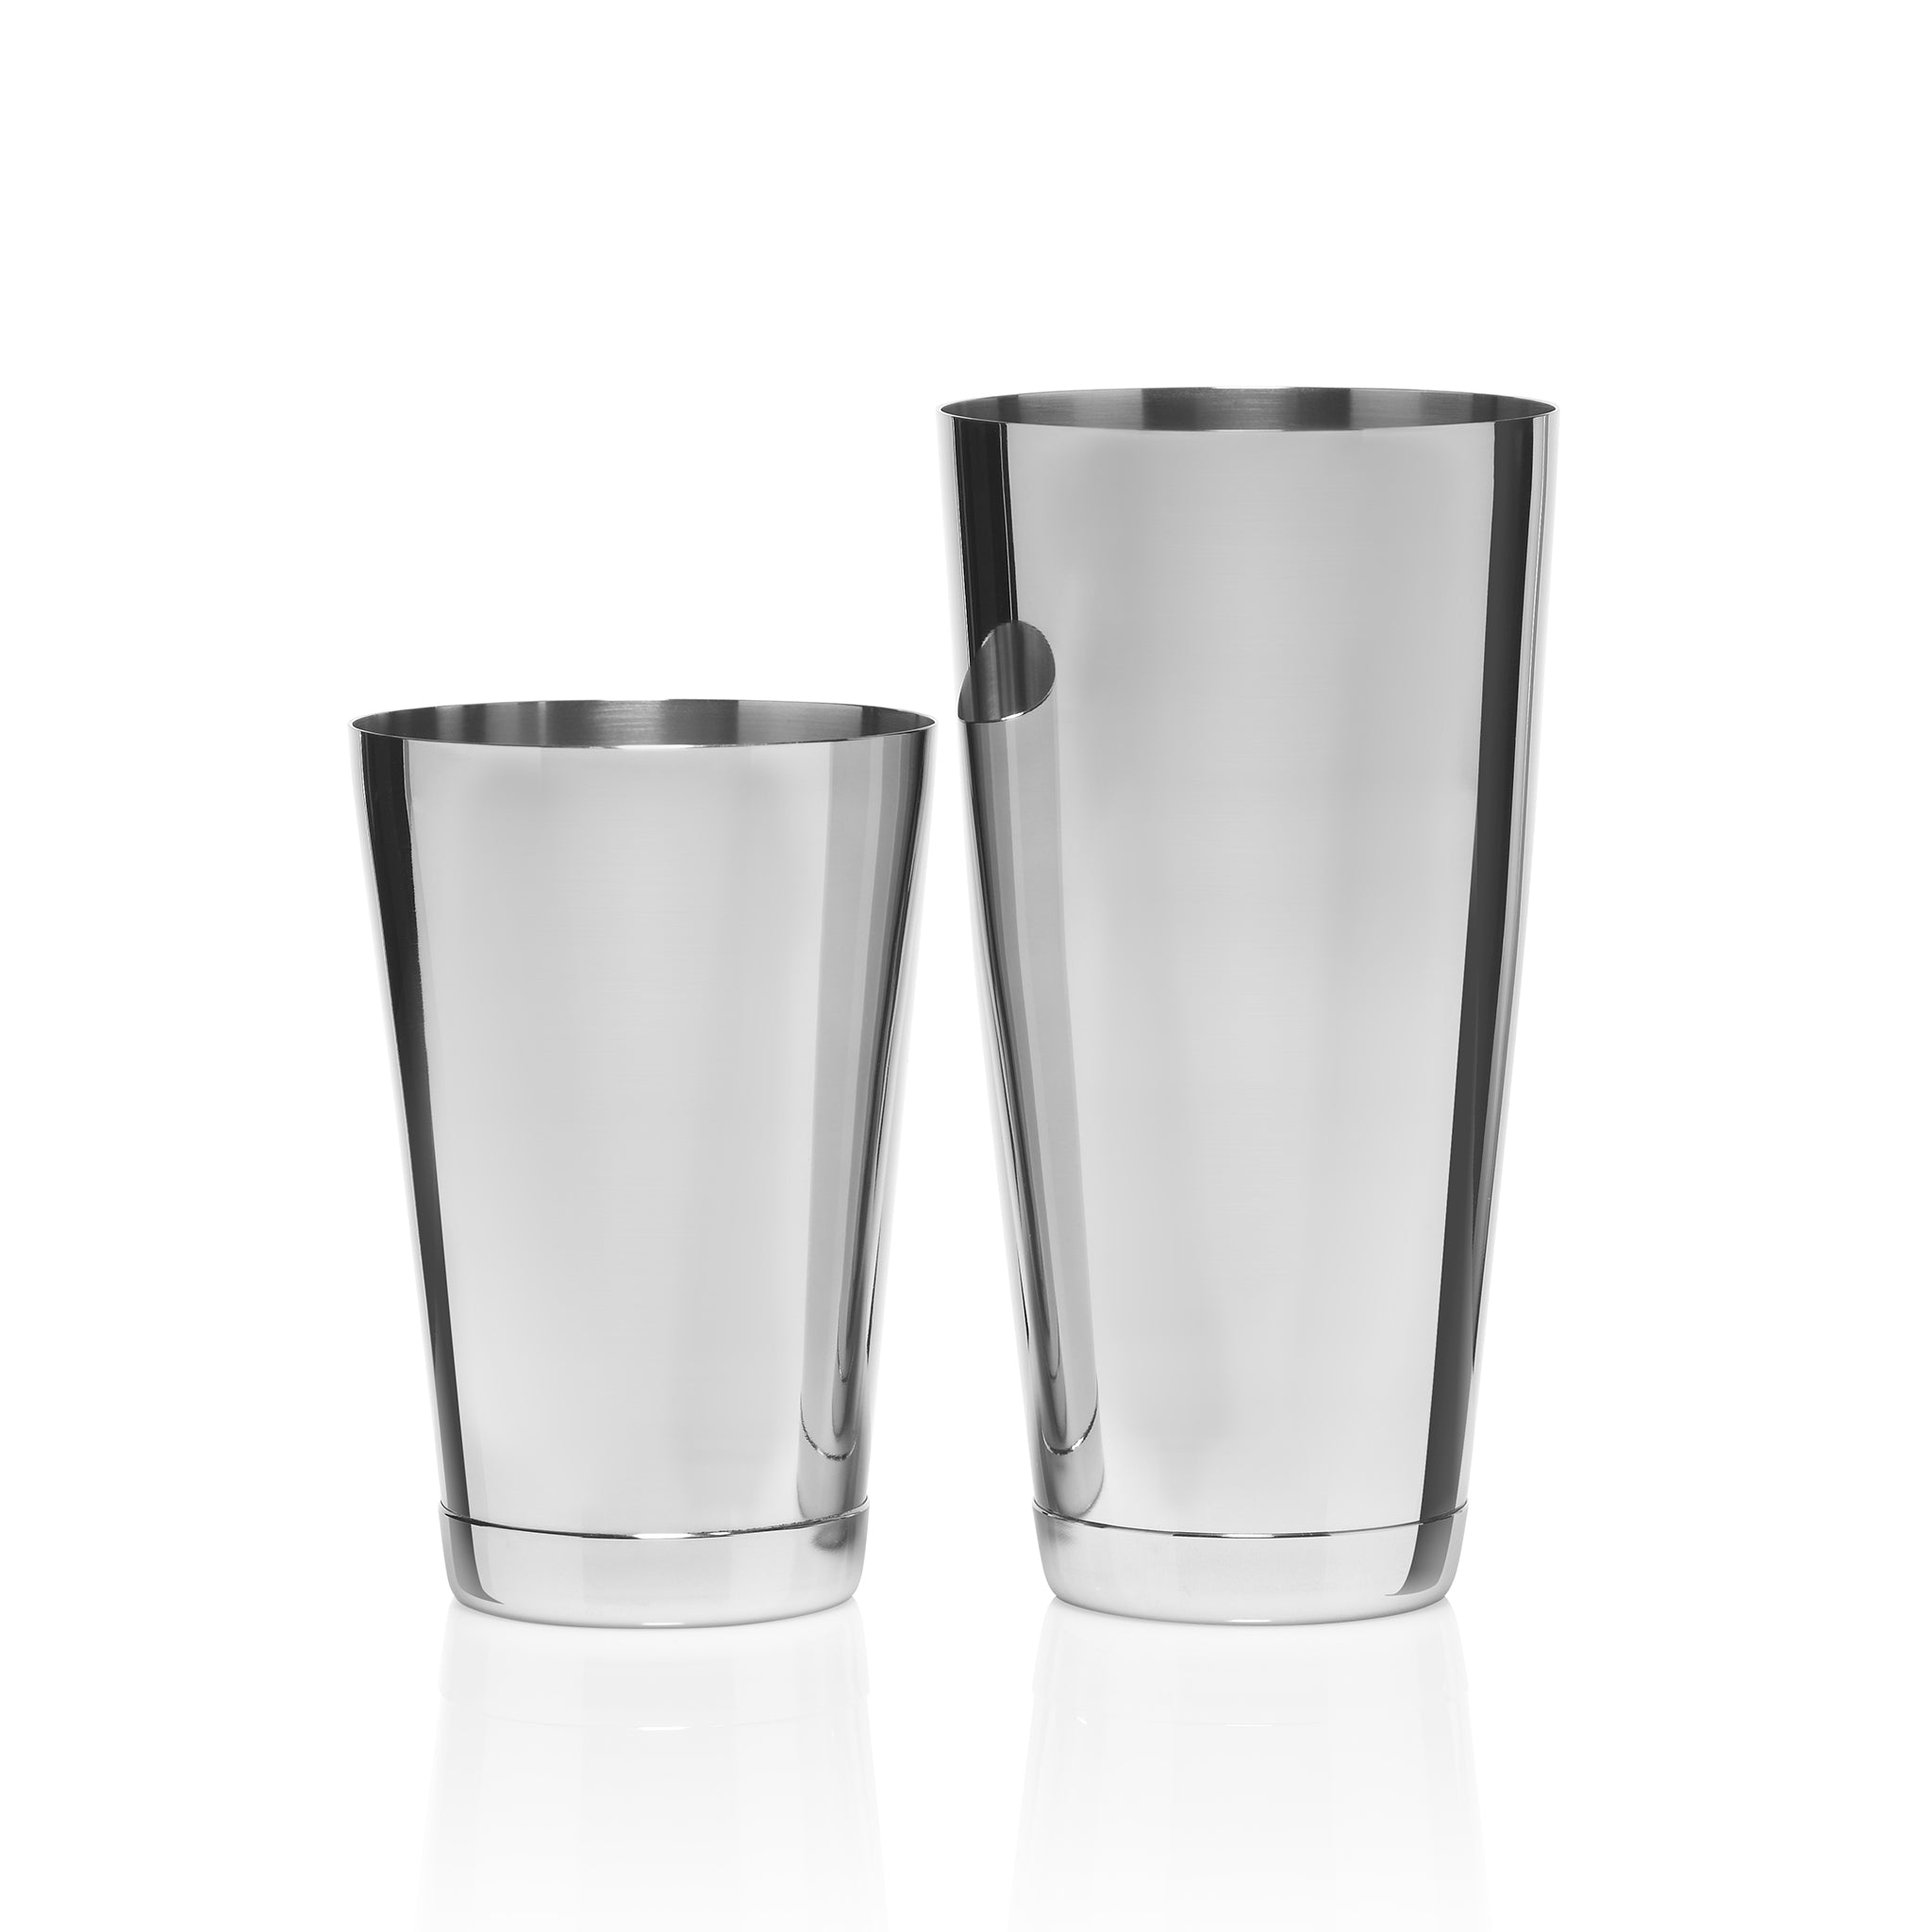 Set of Koriko Weighted Boston-Style Stainless Steel Cocktail Shaker